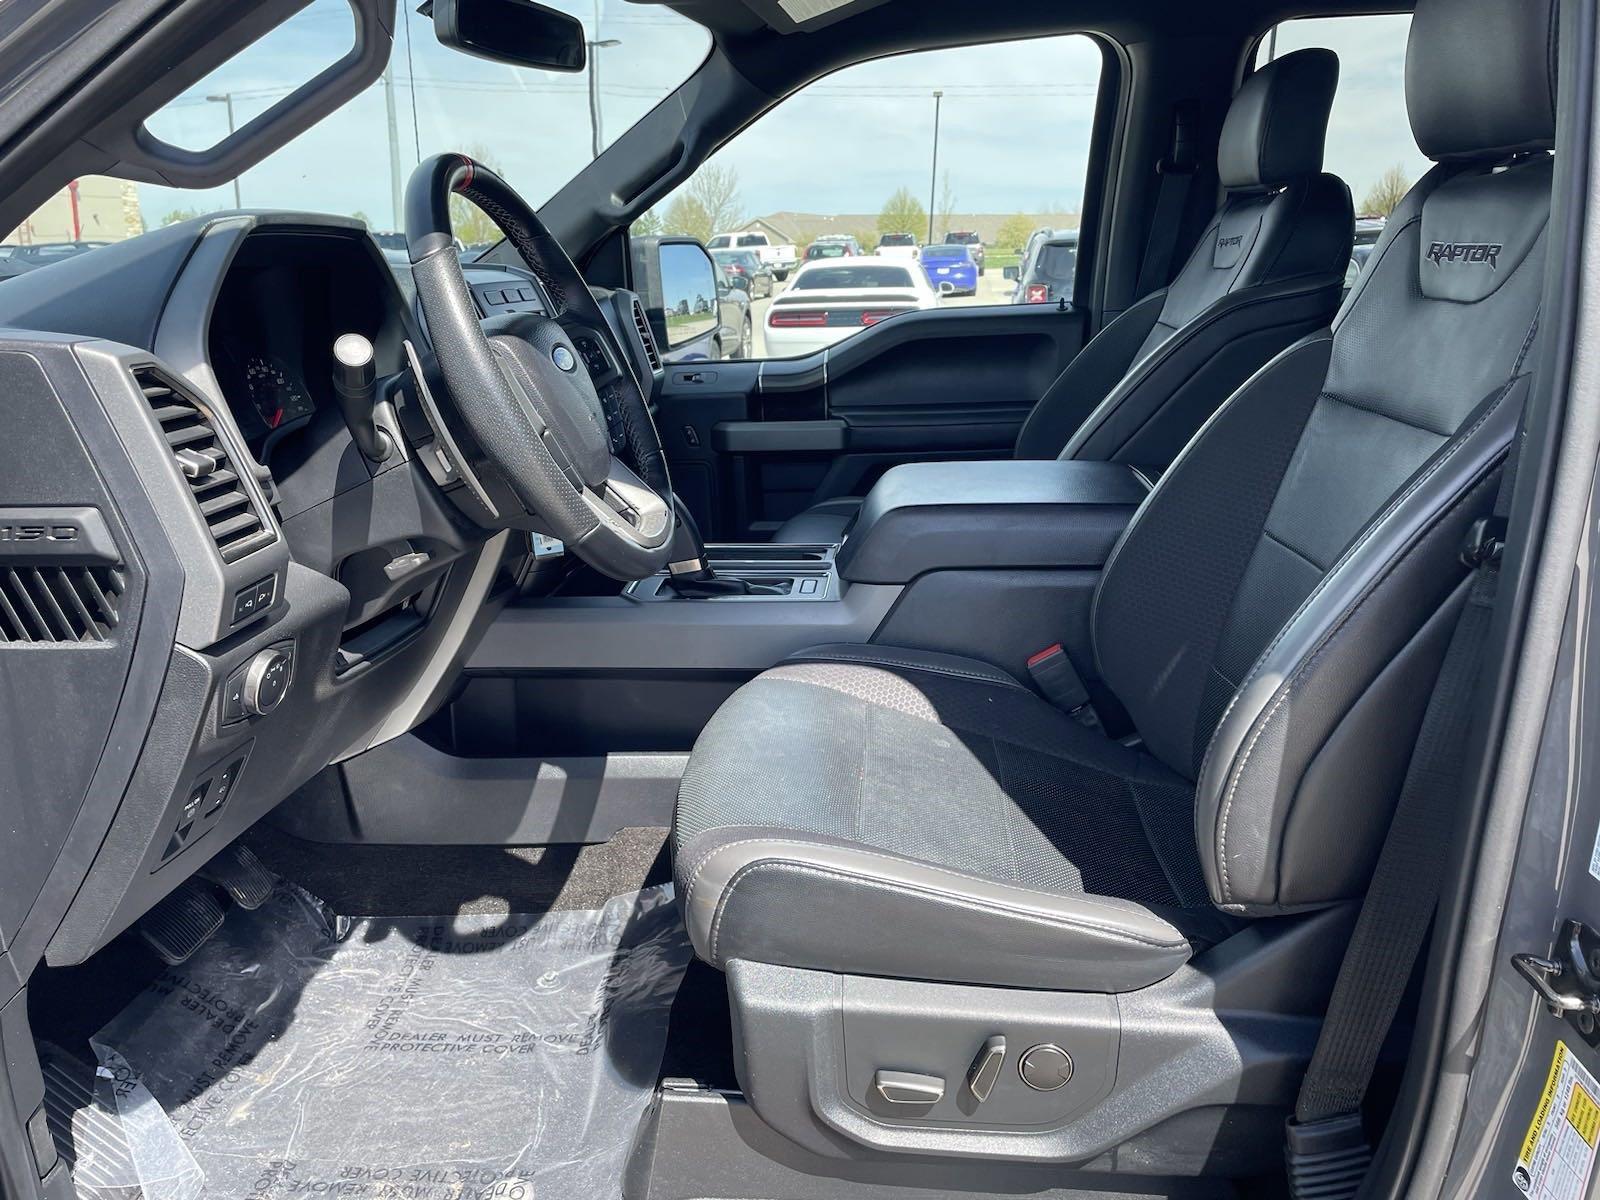 Used 2020 Ford F-150 Raptor Crew Cab Truck for sale in Lincoln NE